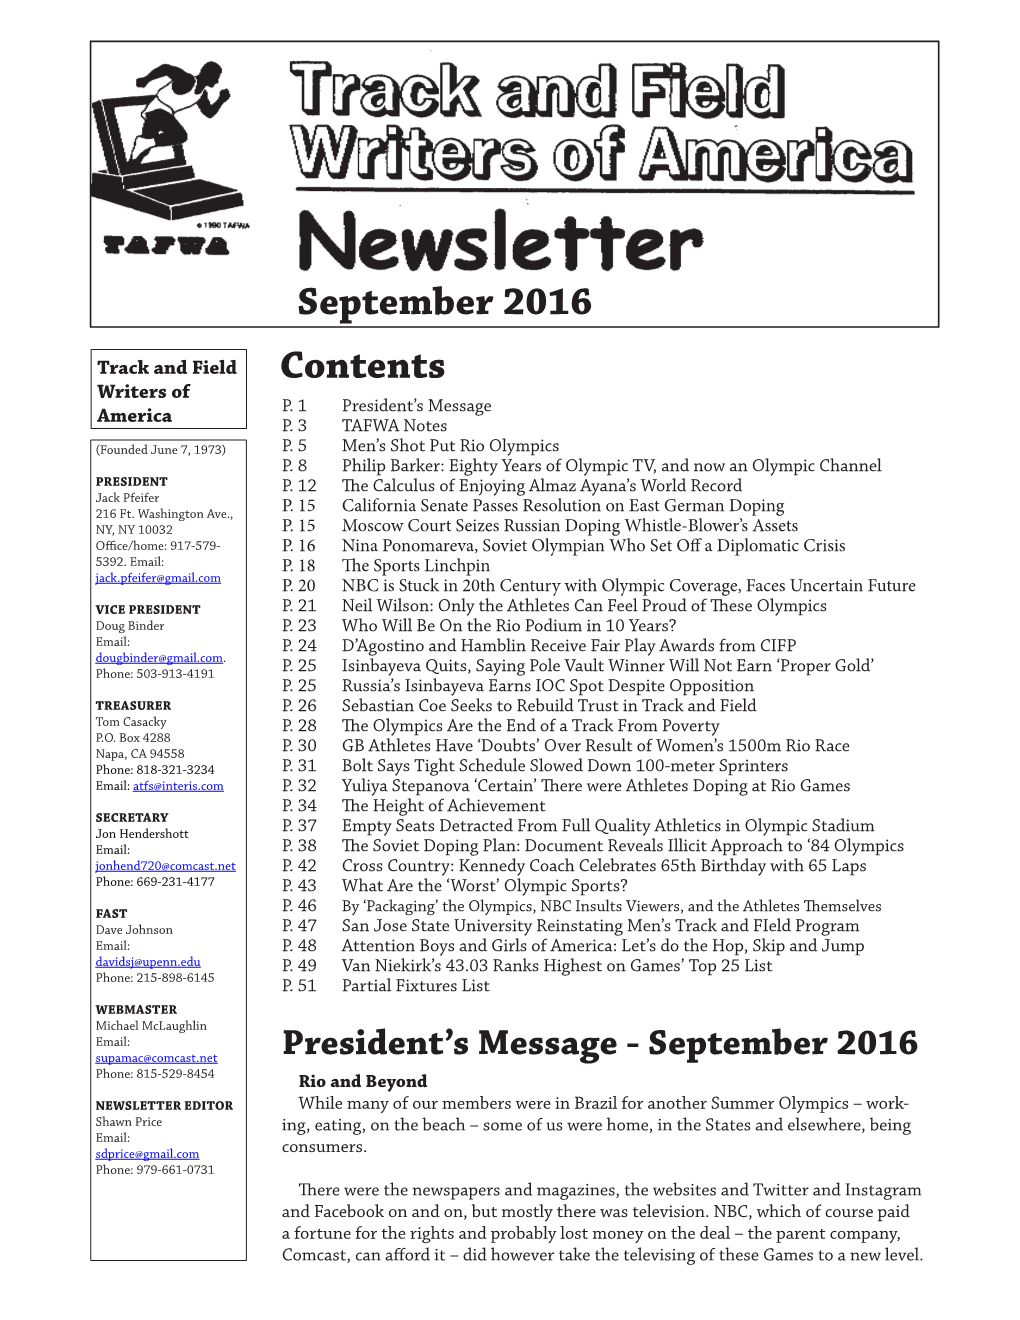 September 2016 Contents